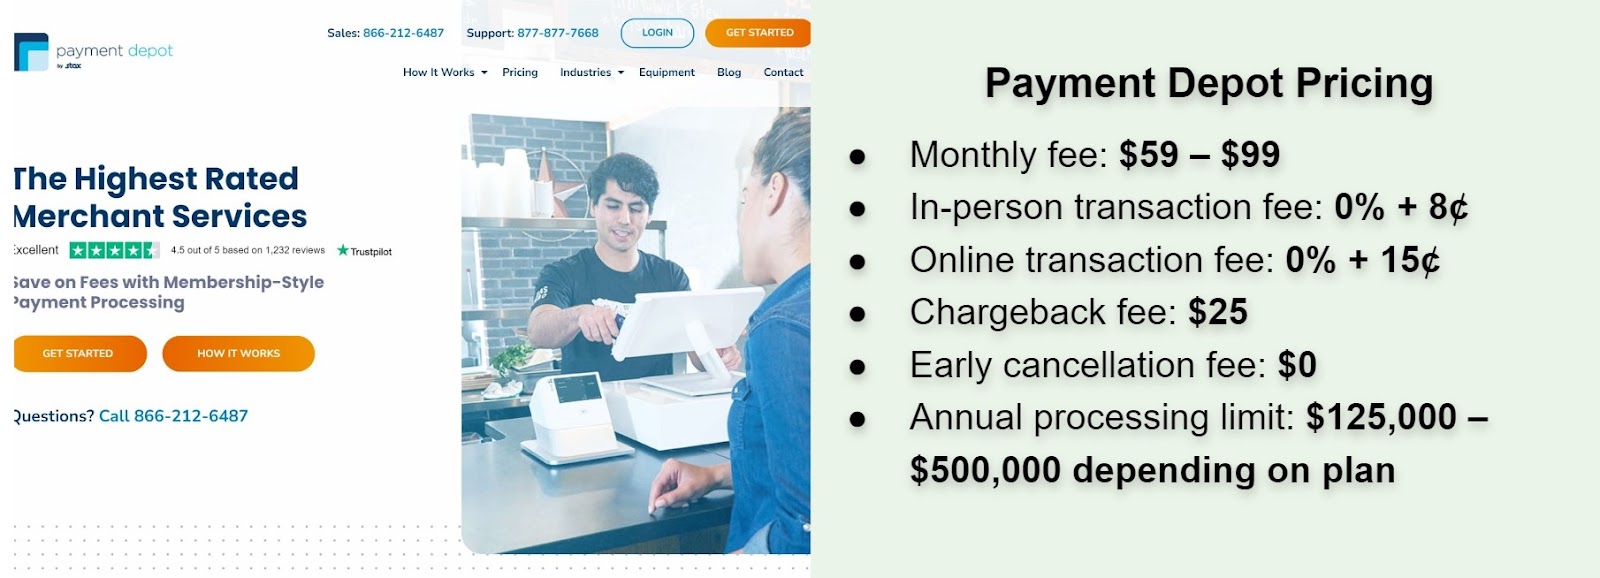 Payment Depot plan pricing and fees.